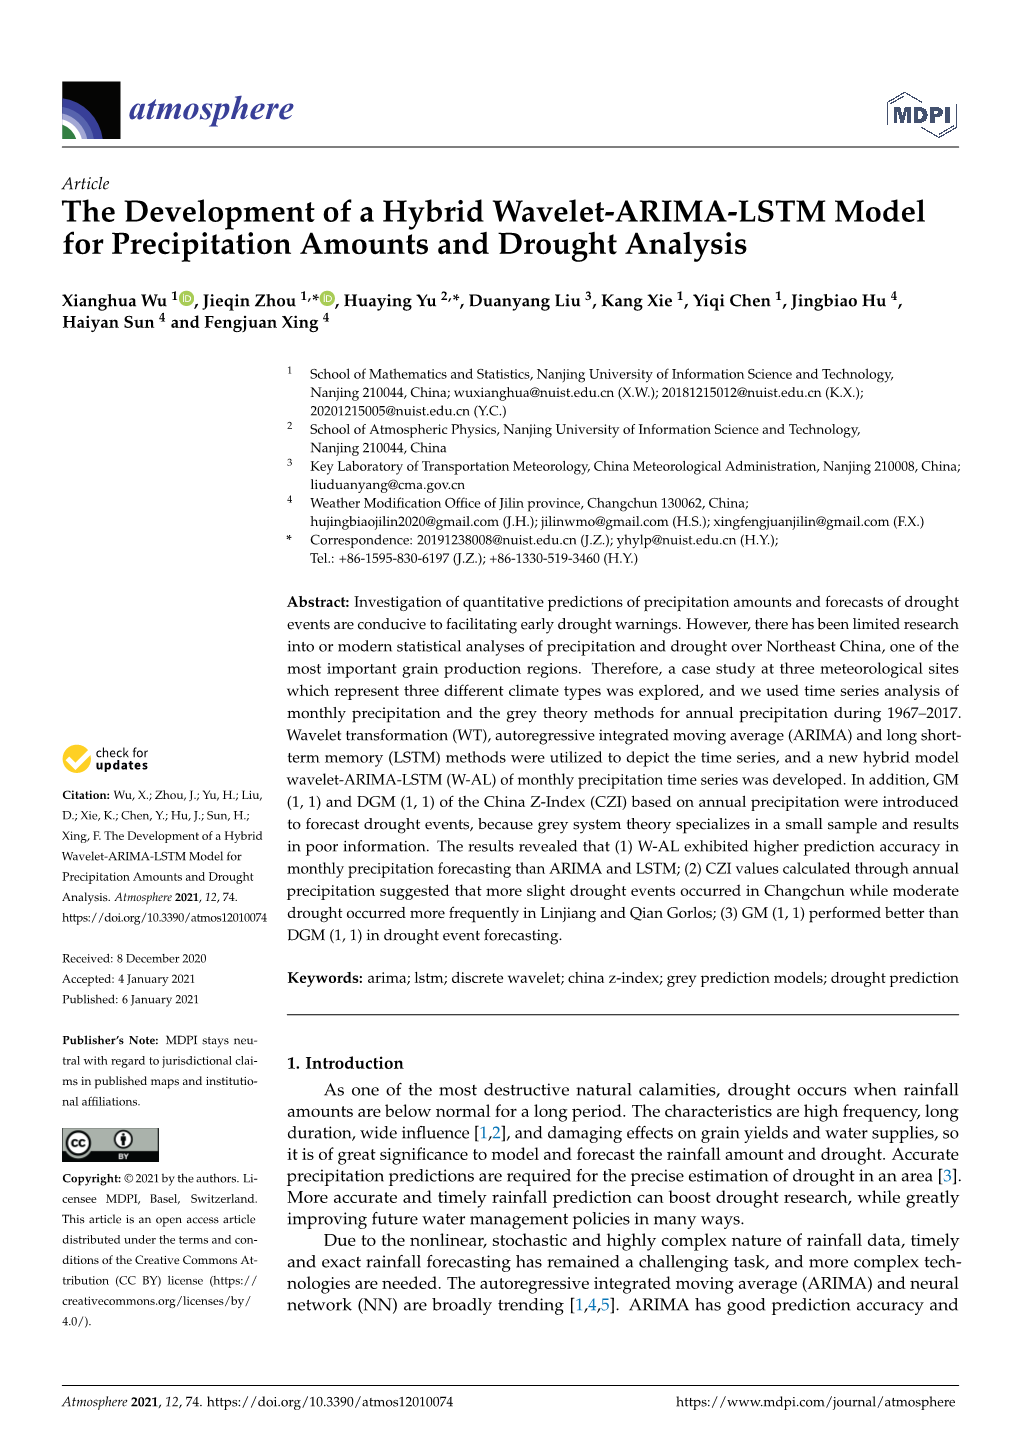 The Development of a Hybrid Wavelet-ARIMA-LSTM Model for Precipitation Amounts and Drought Analysis